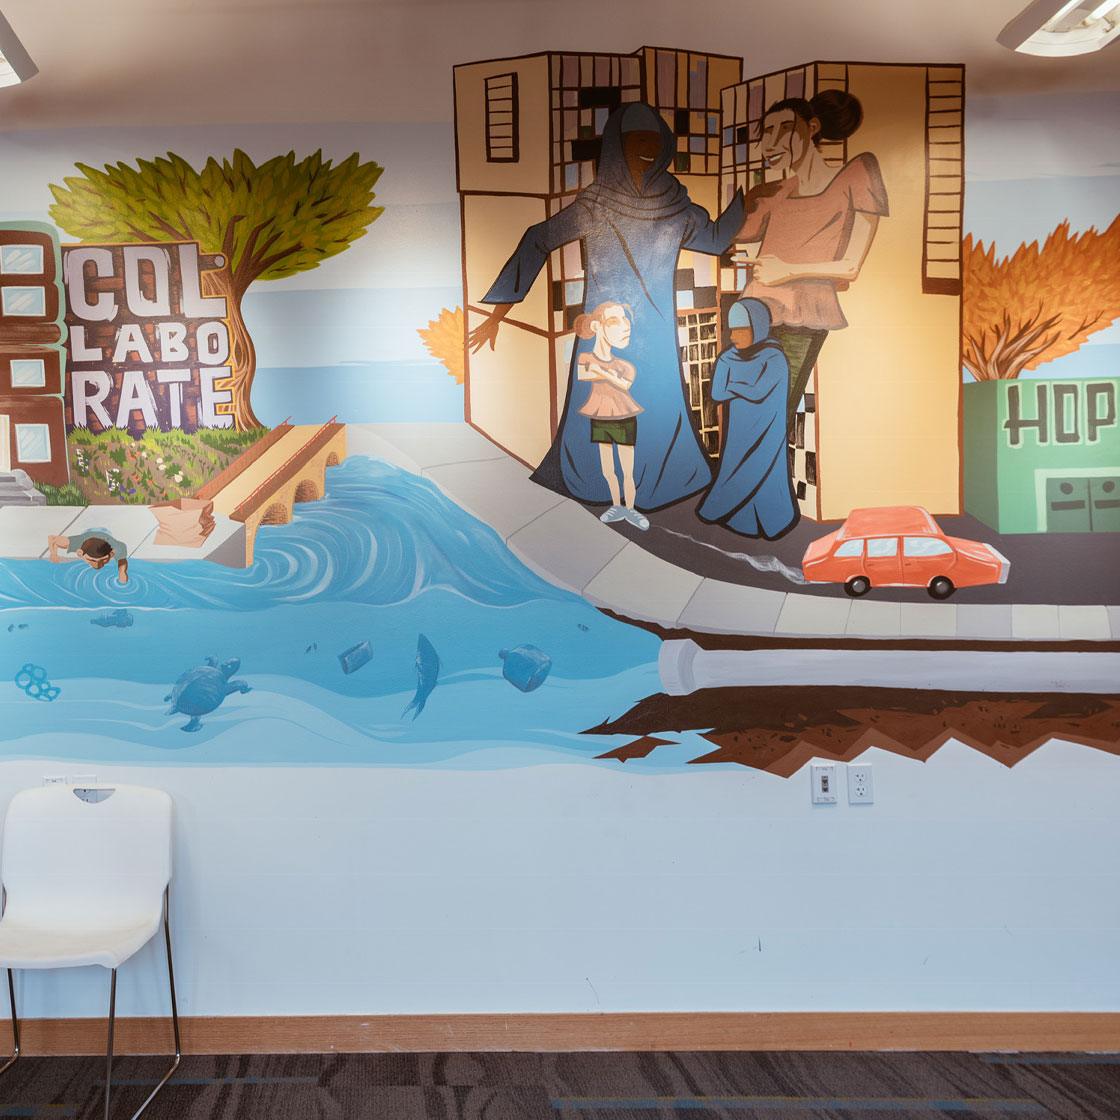 An office space decorated with a painted mural of a cityscape